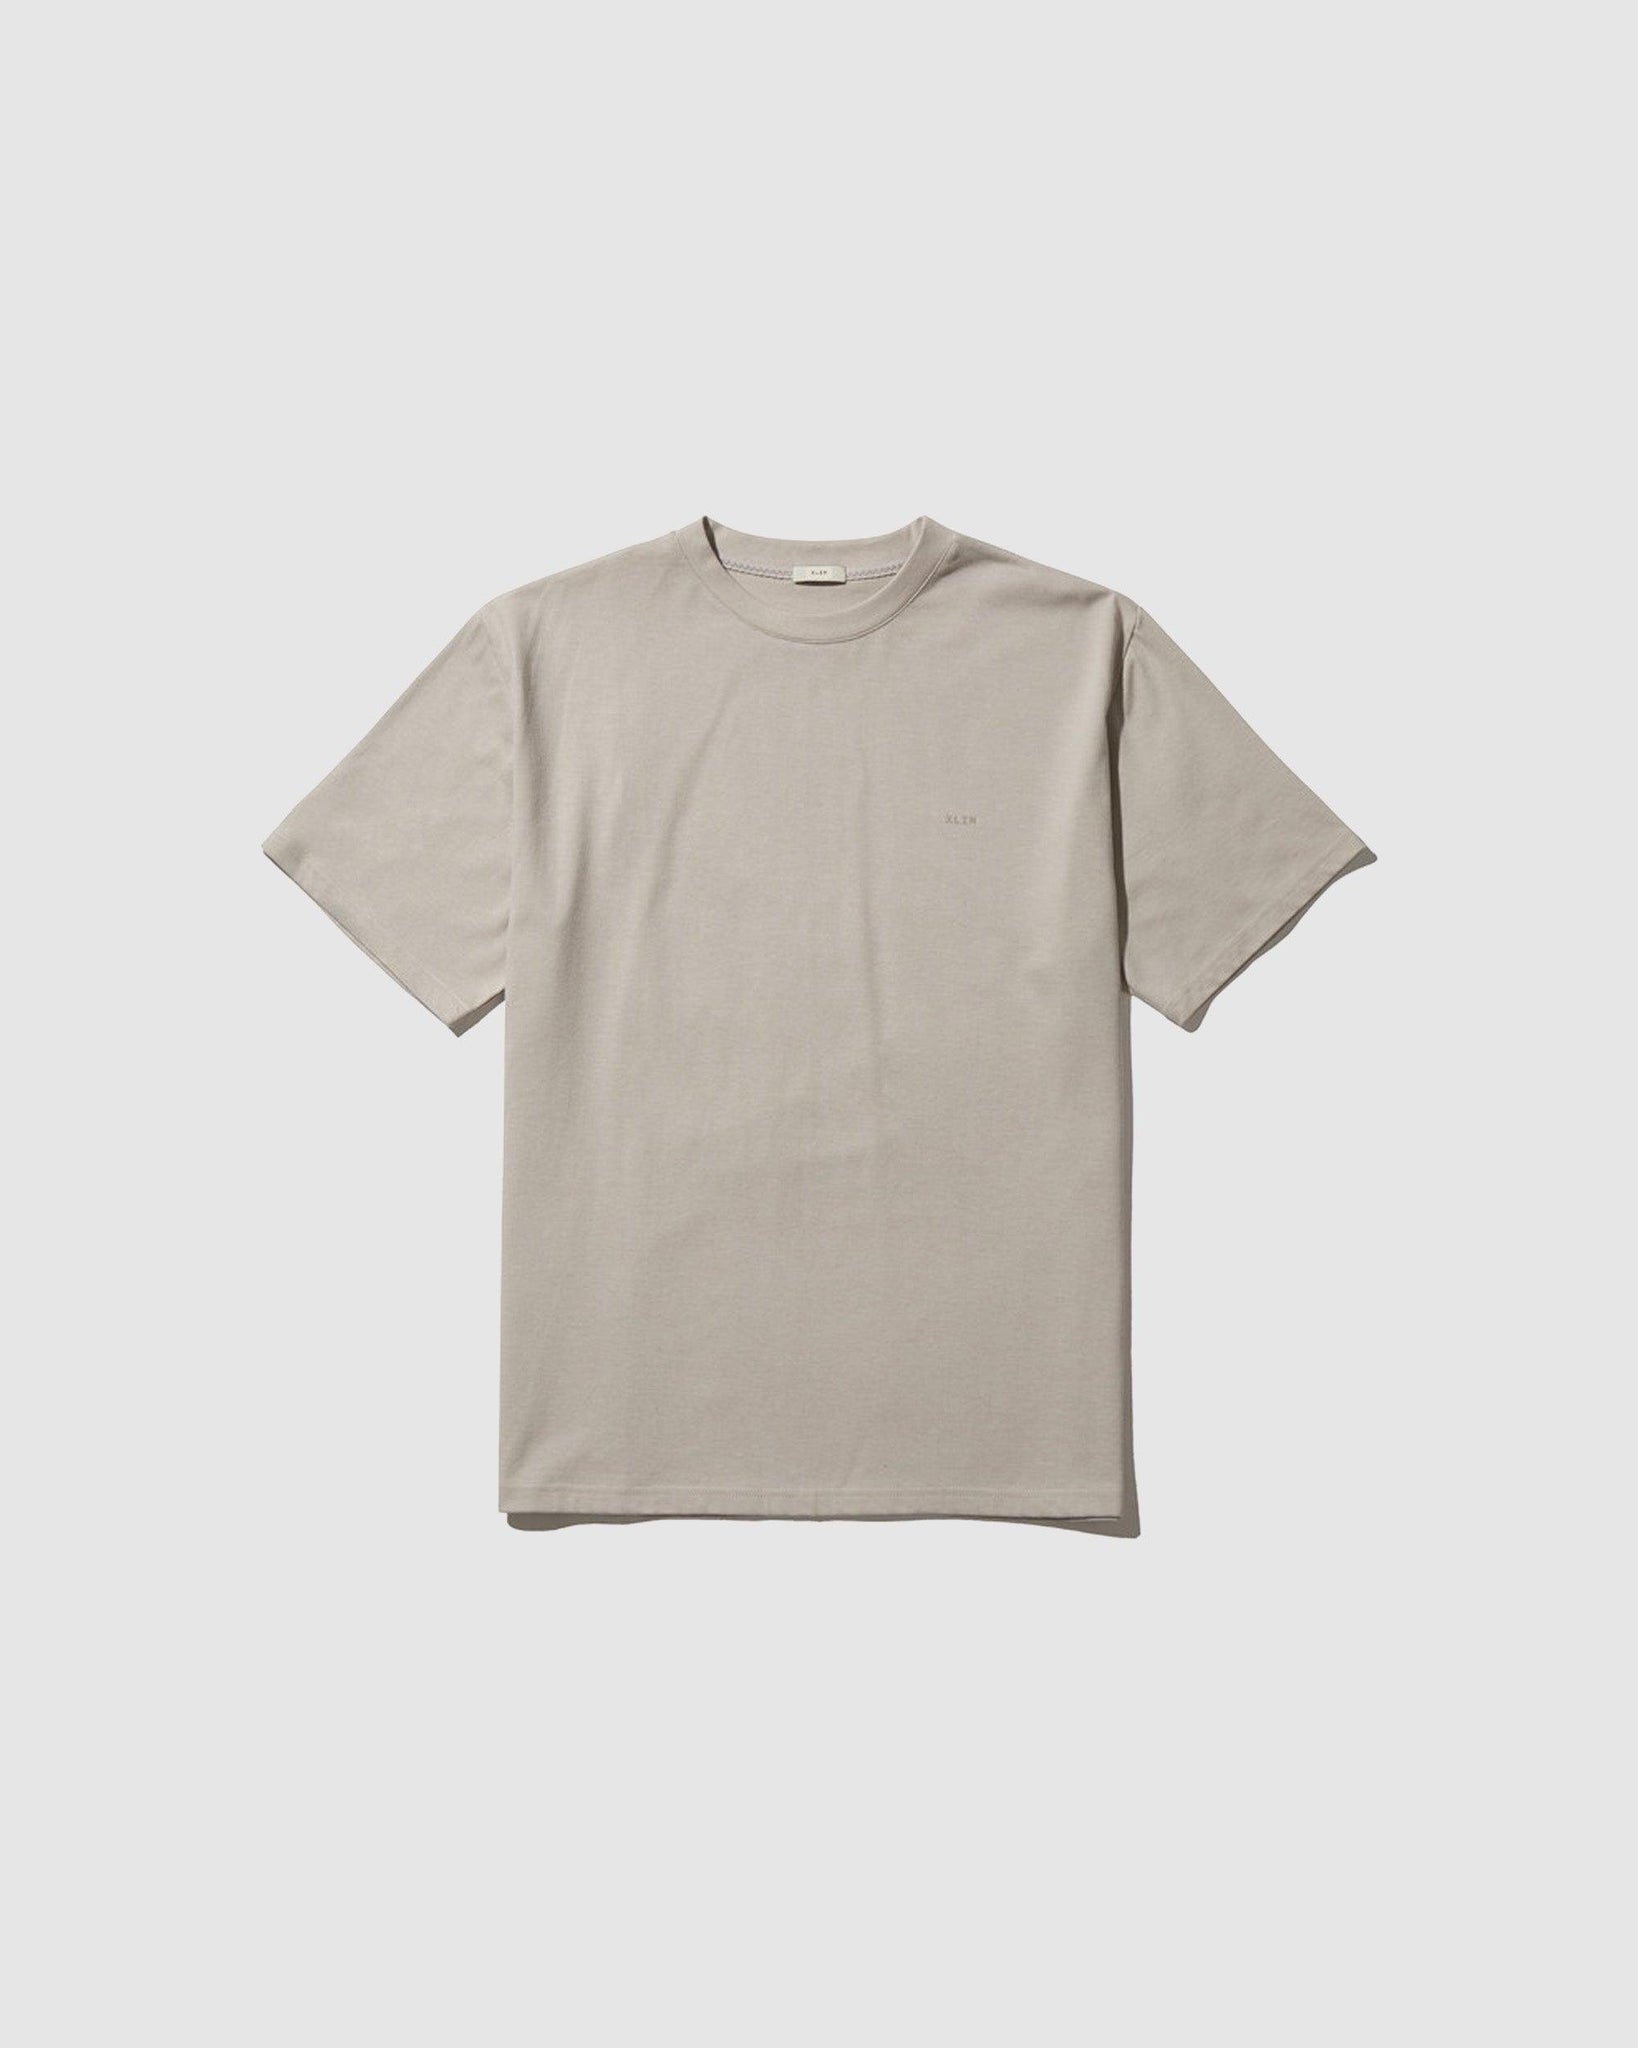 01 T-shirt - {{ collection.title }} - Chinatown Country Club 